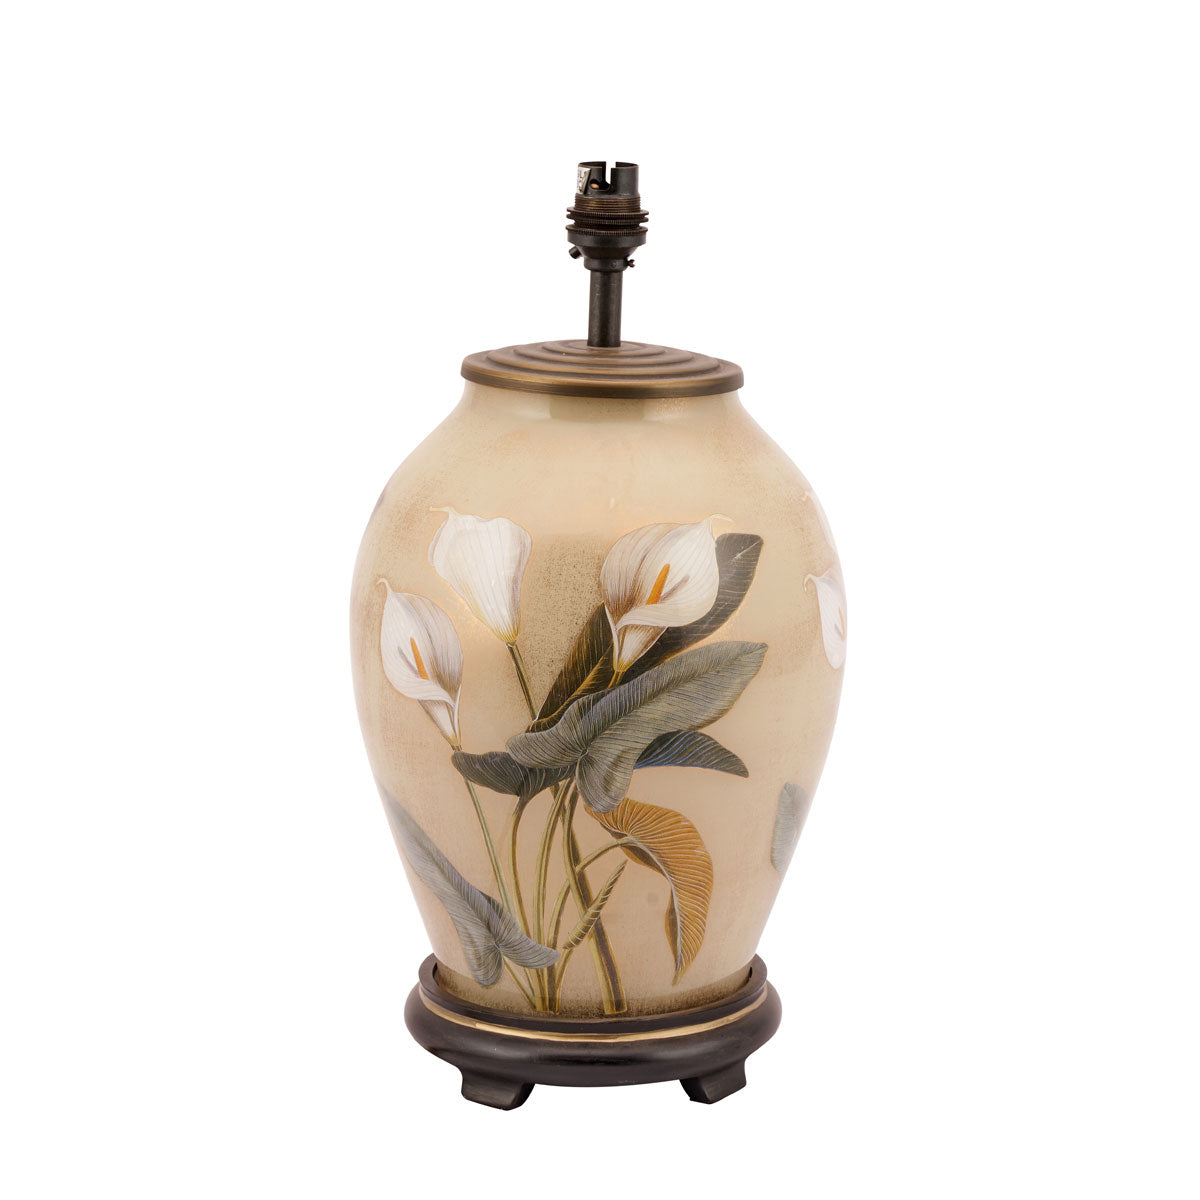 Lily table lamp in size medium by Jenny Worrall and sold by South Charlotte Fine Lighting